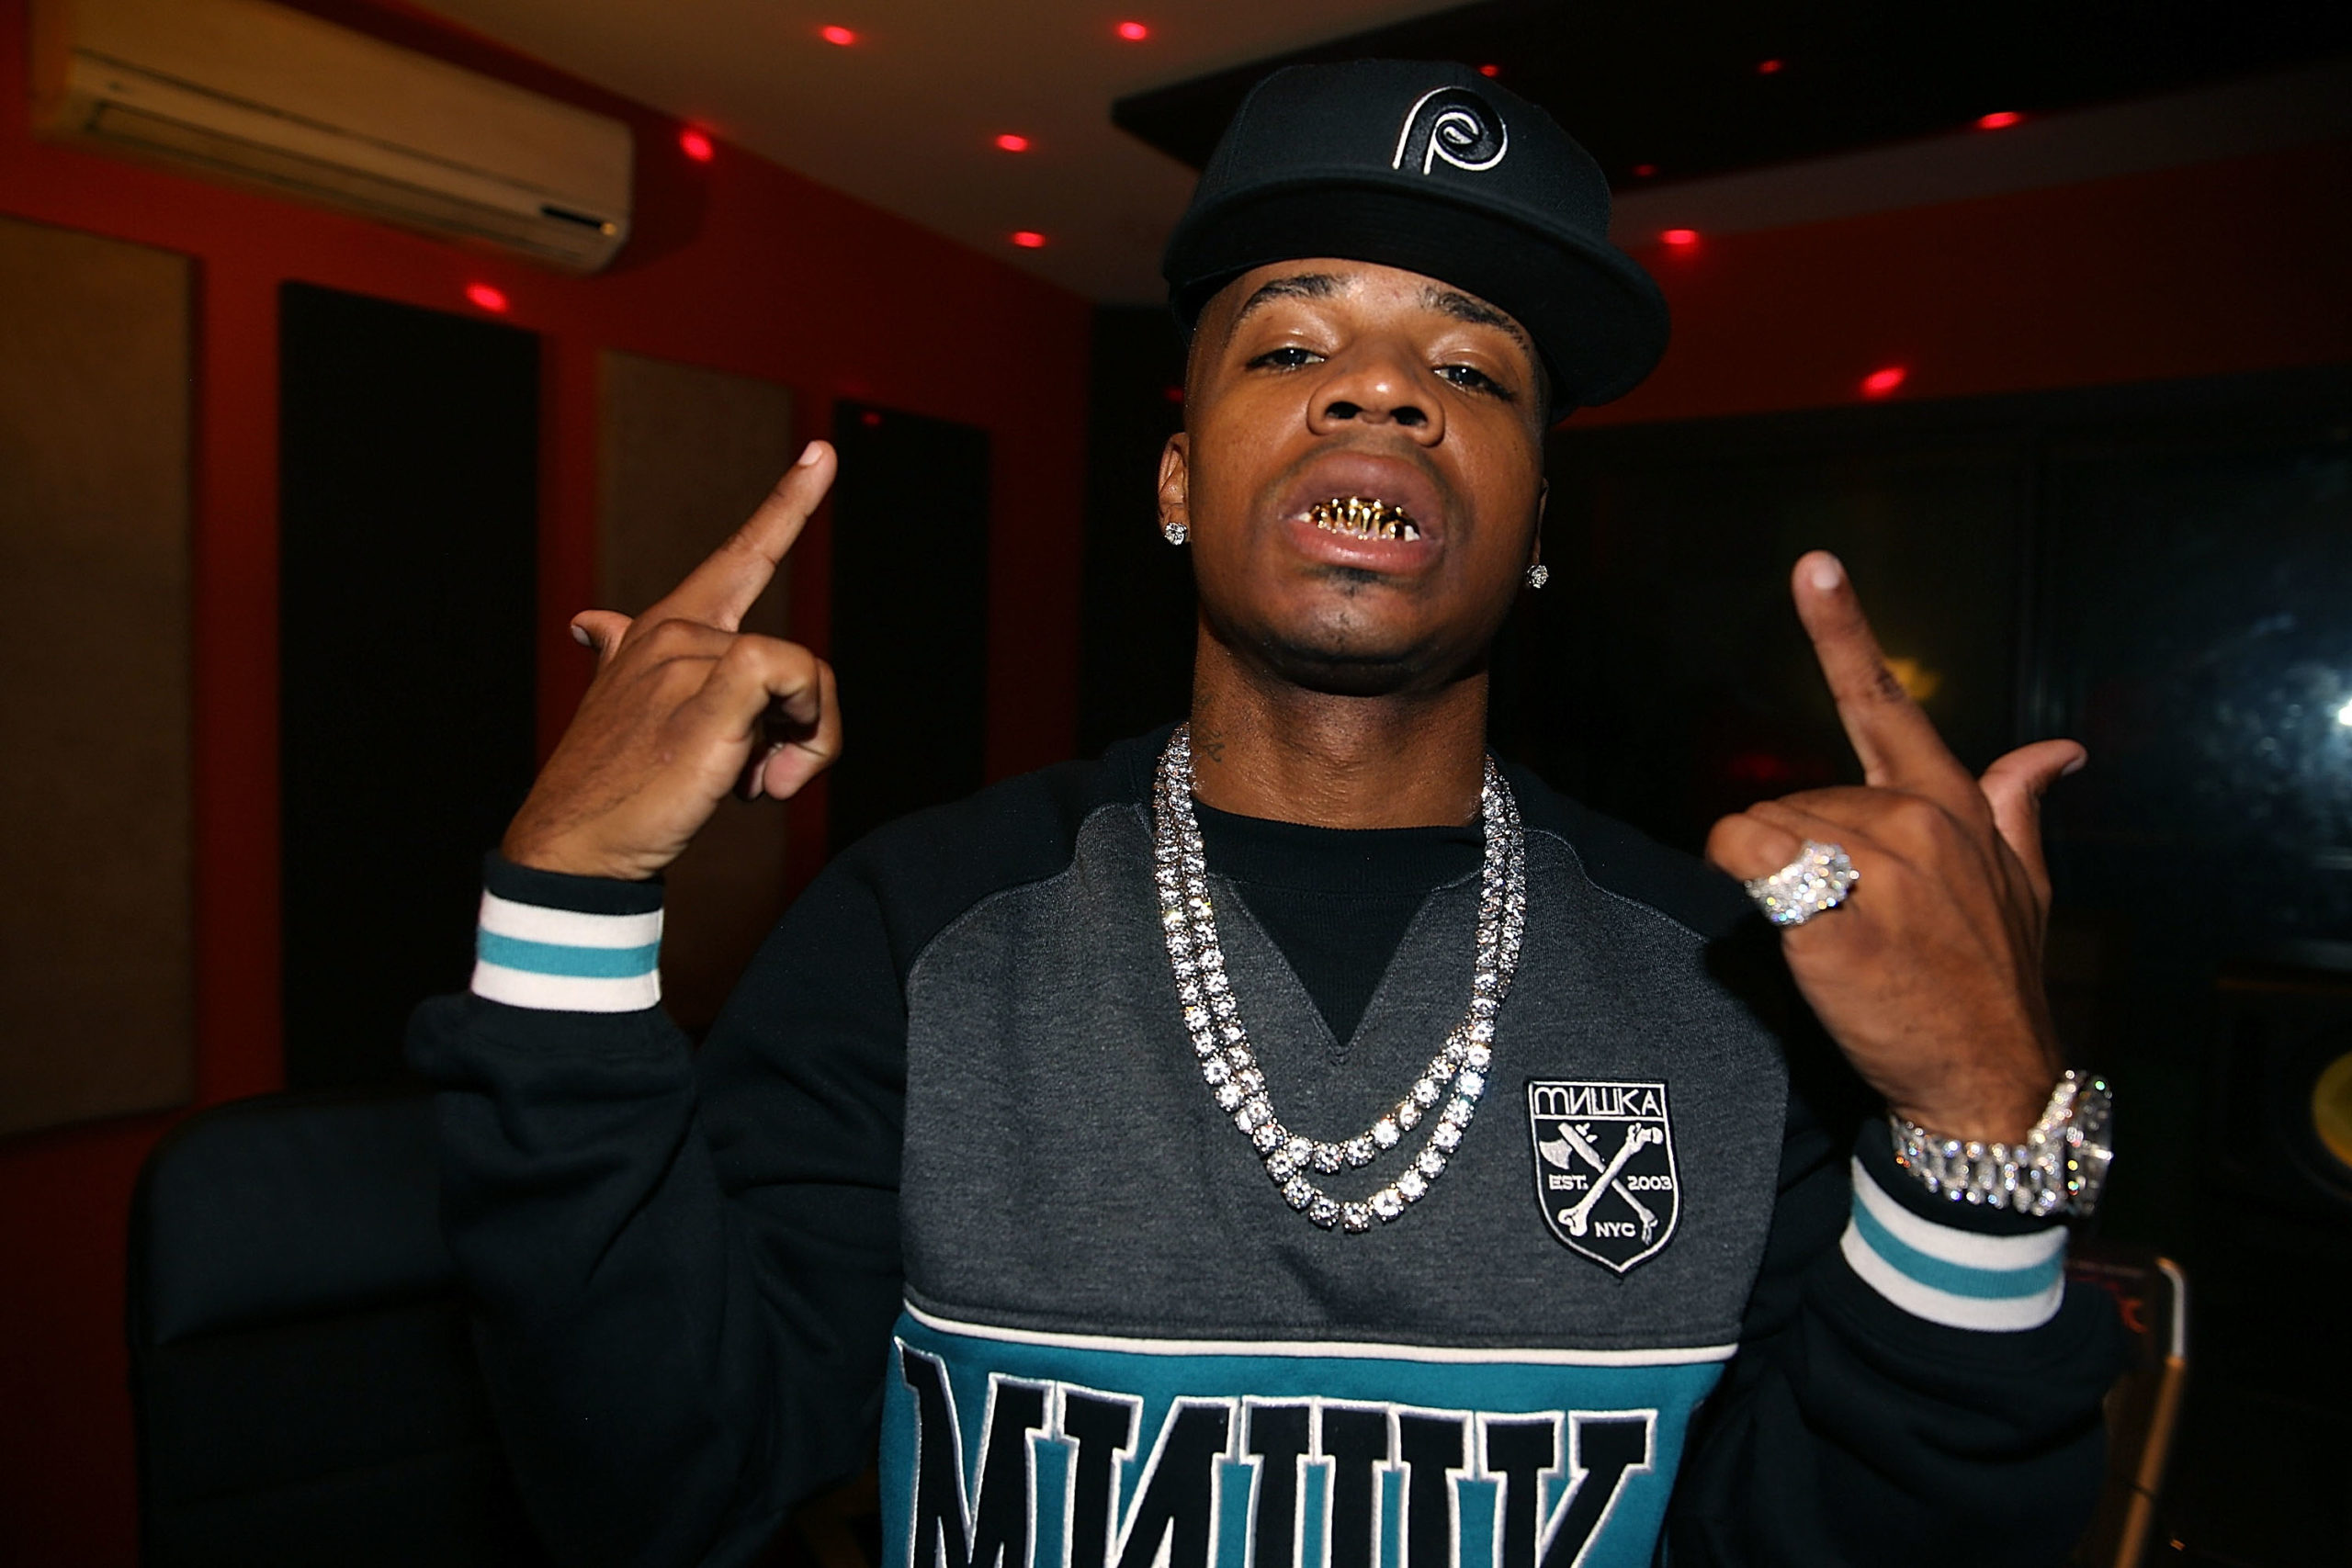 Zamn Zaddy': Rapper Plies Has the Ladies Aflutter After He Removes His...